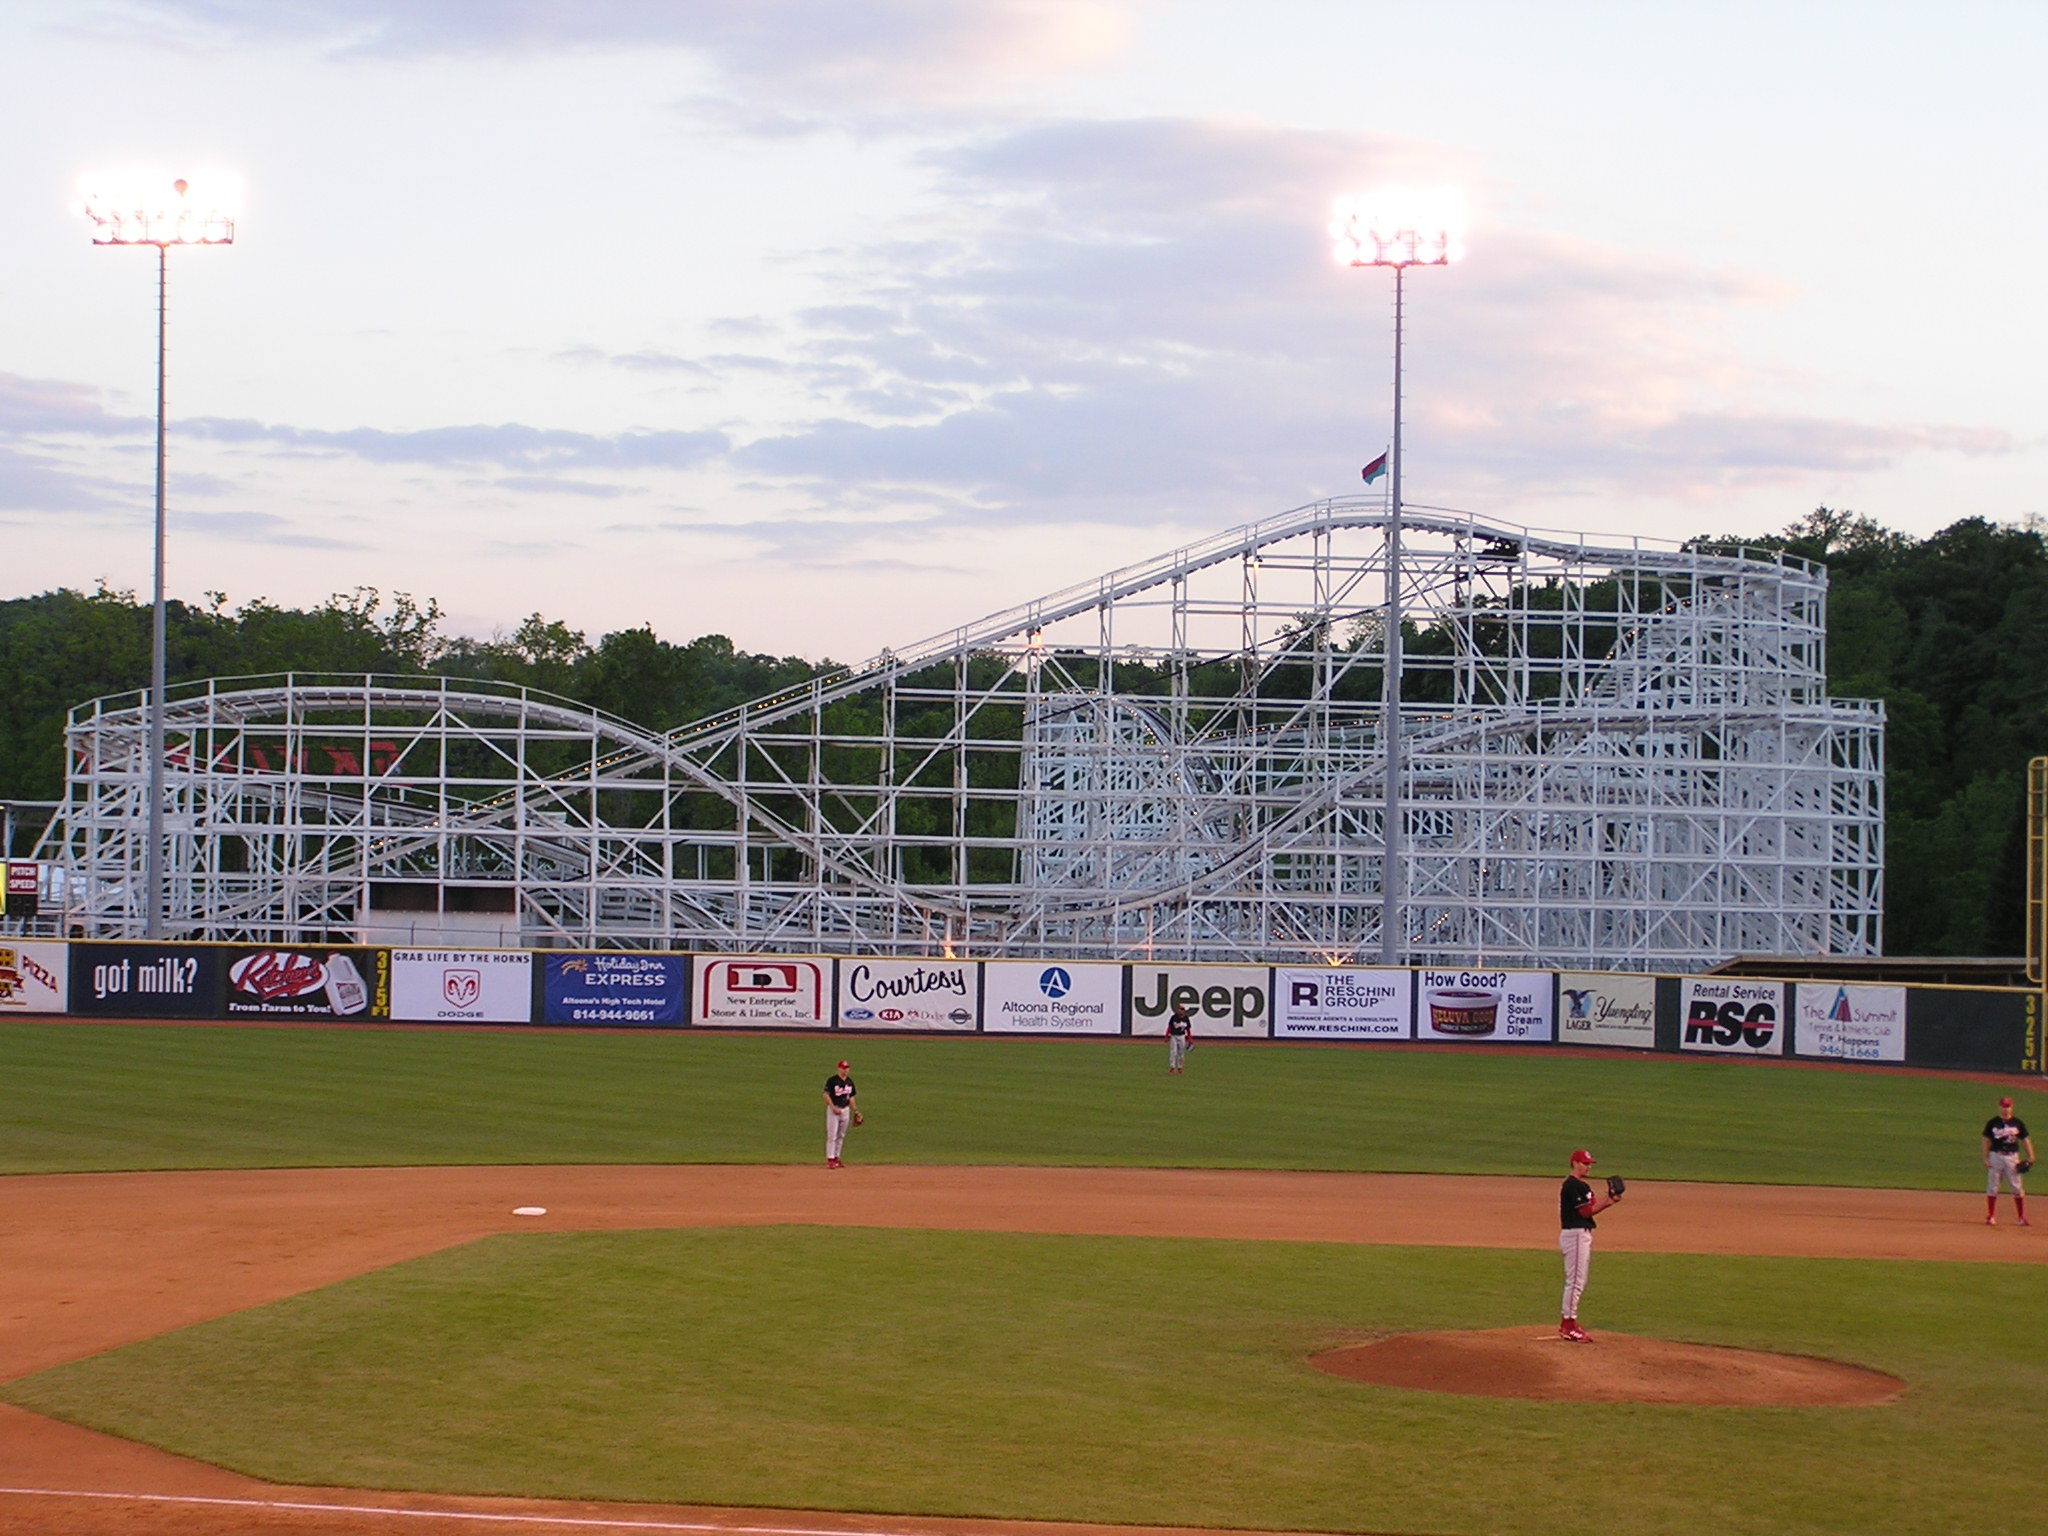 The Roller Coaster sitting behind Right Field 